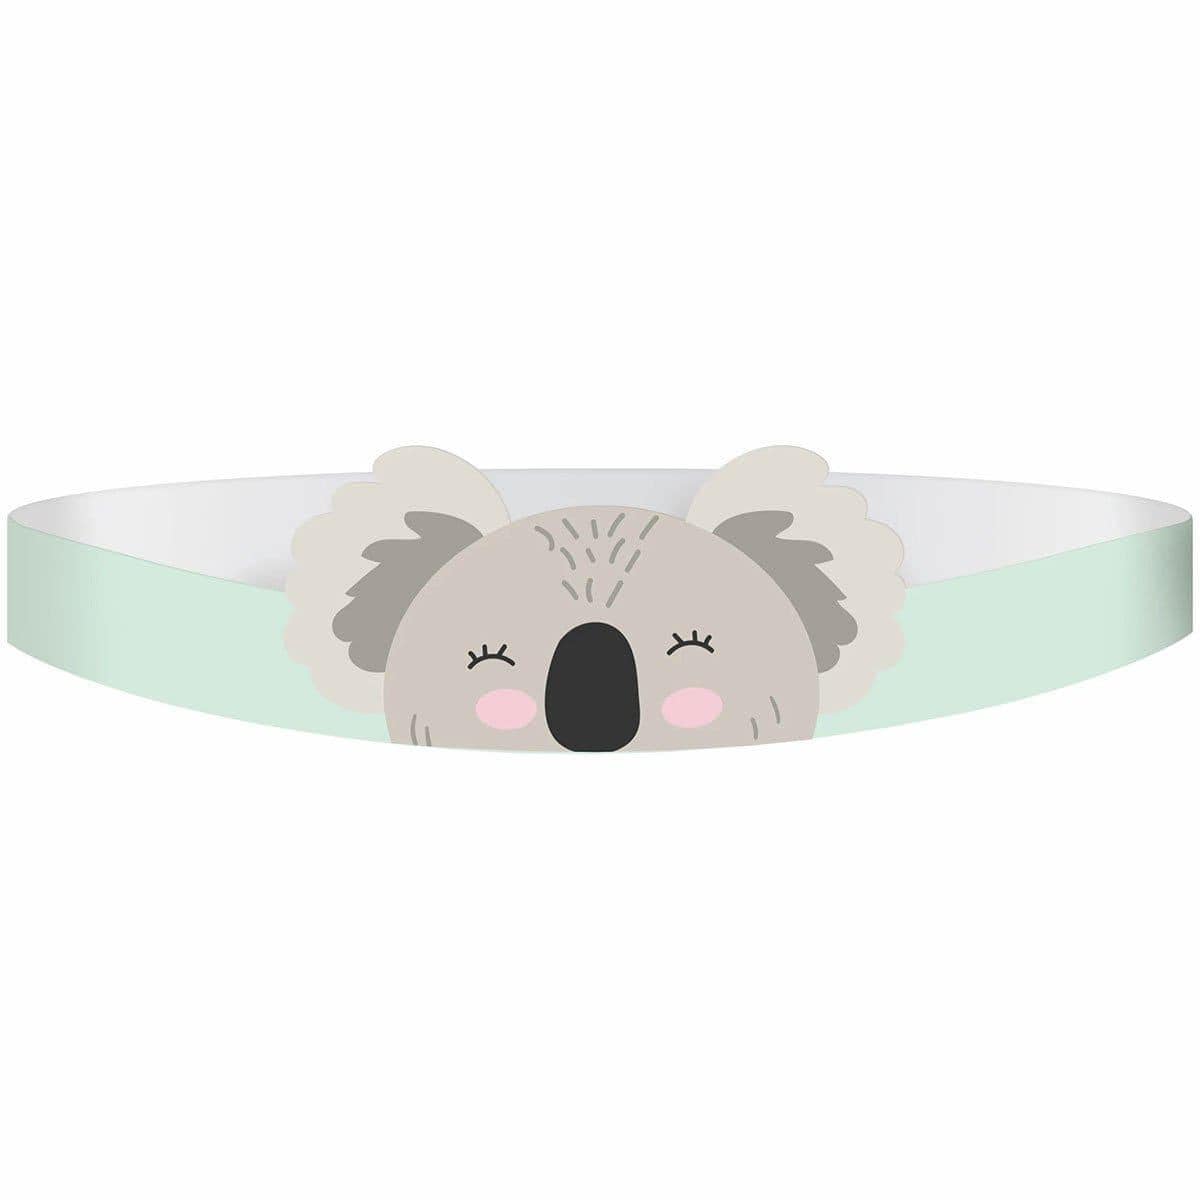 Buy Kids Birthday Koala Party Paper Tiara, 8 Count sold at Party Expert